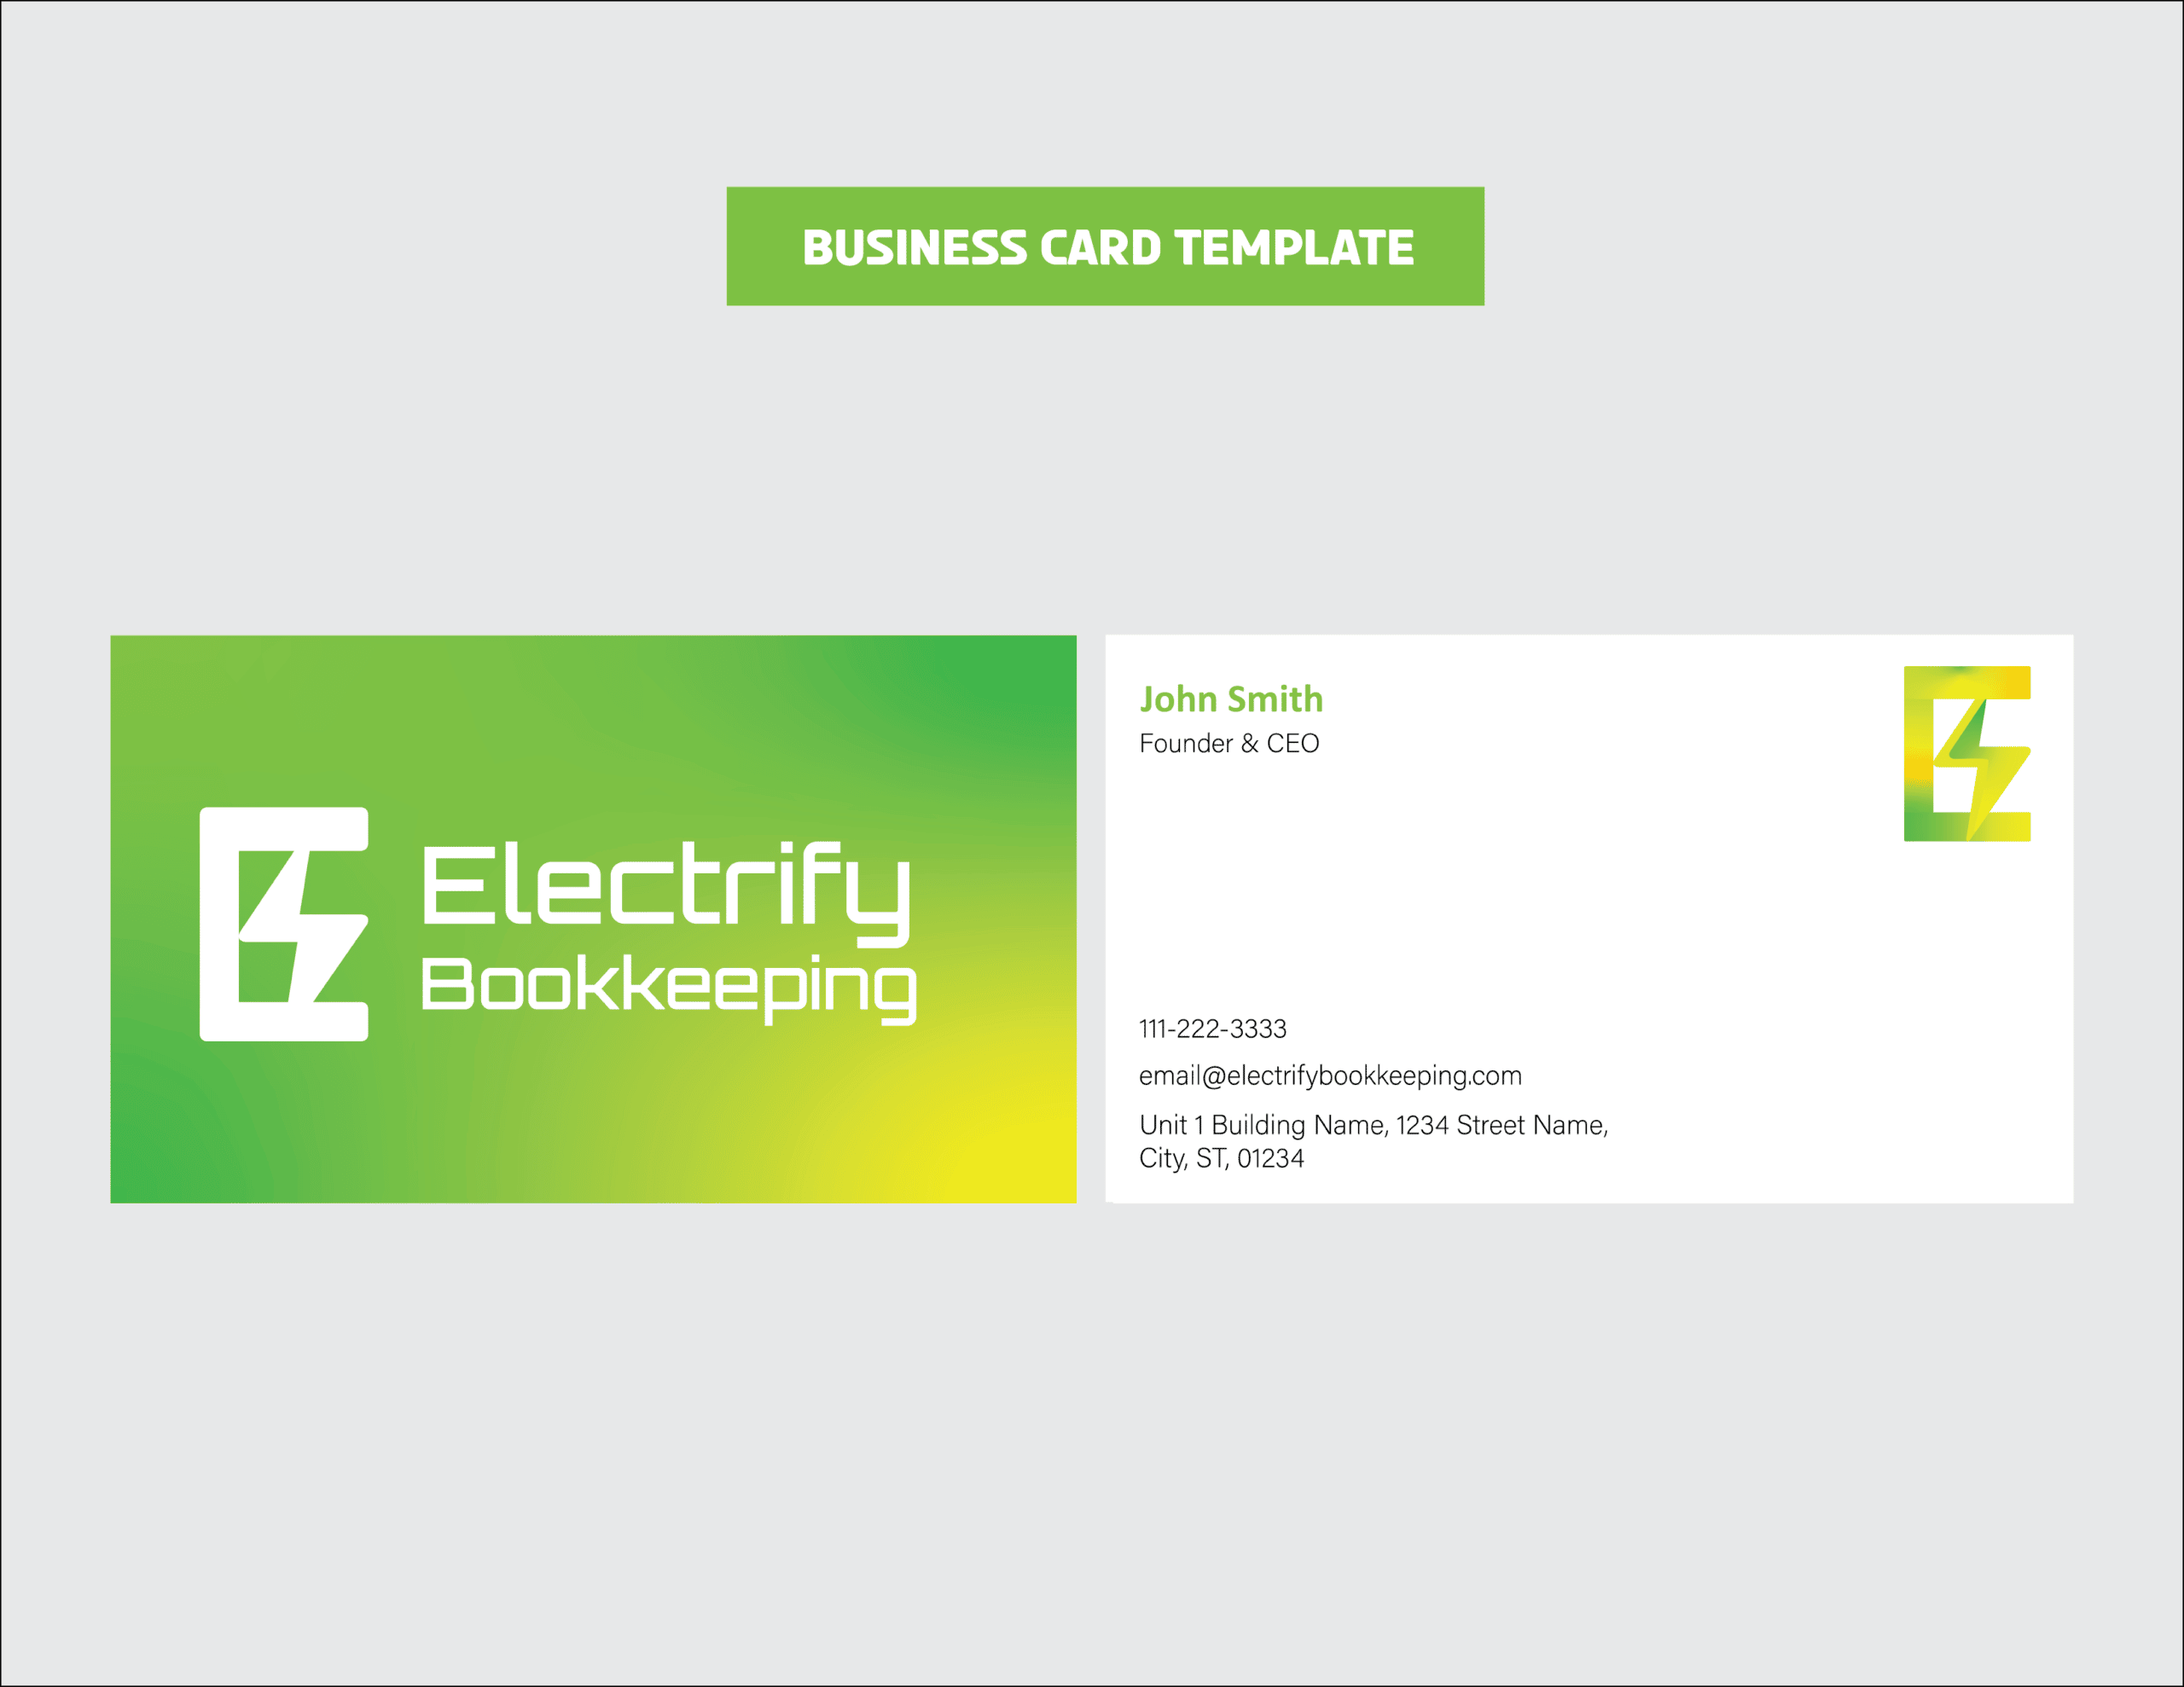 04_ElectrifyBookkeeping_Business Card Template